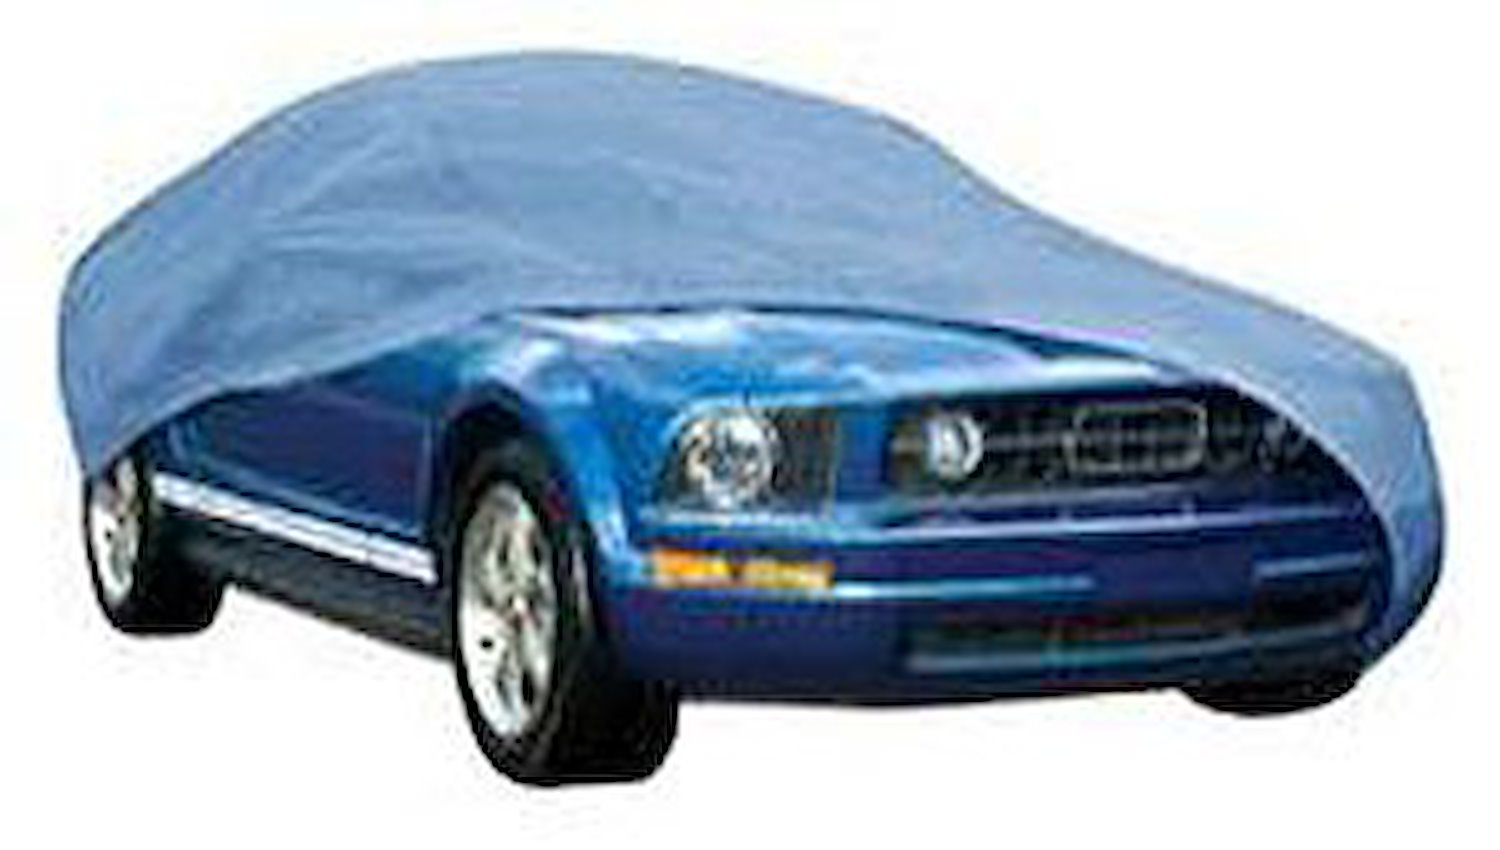 Duro Car Cover Fits Cars Up To 13" 1" in Length